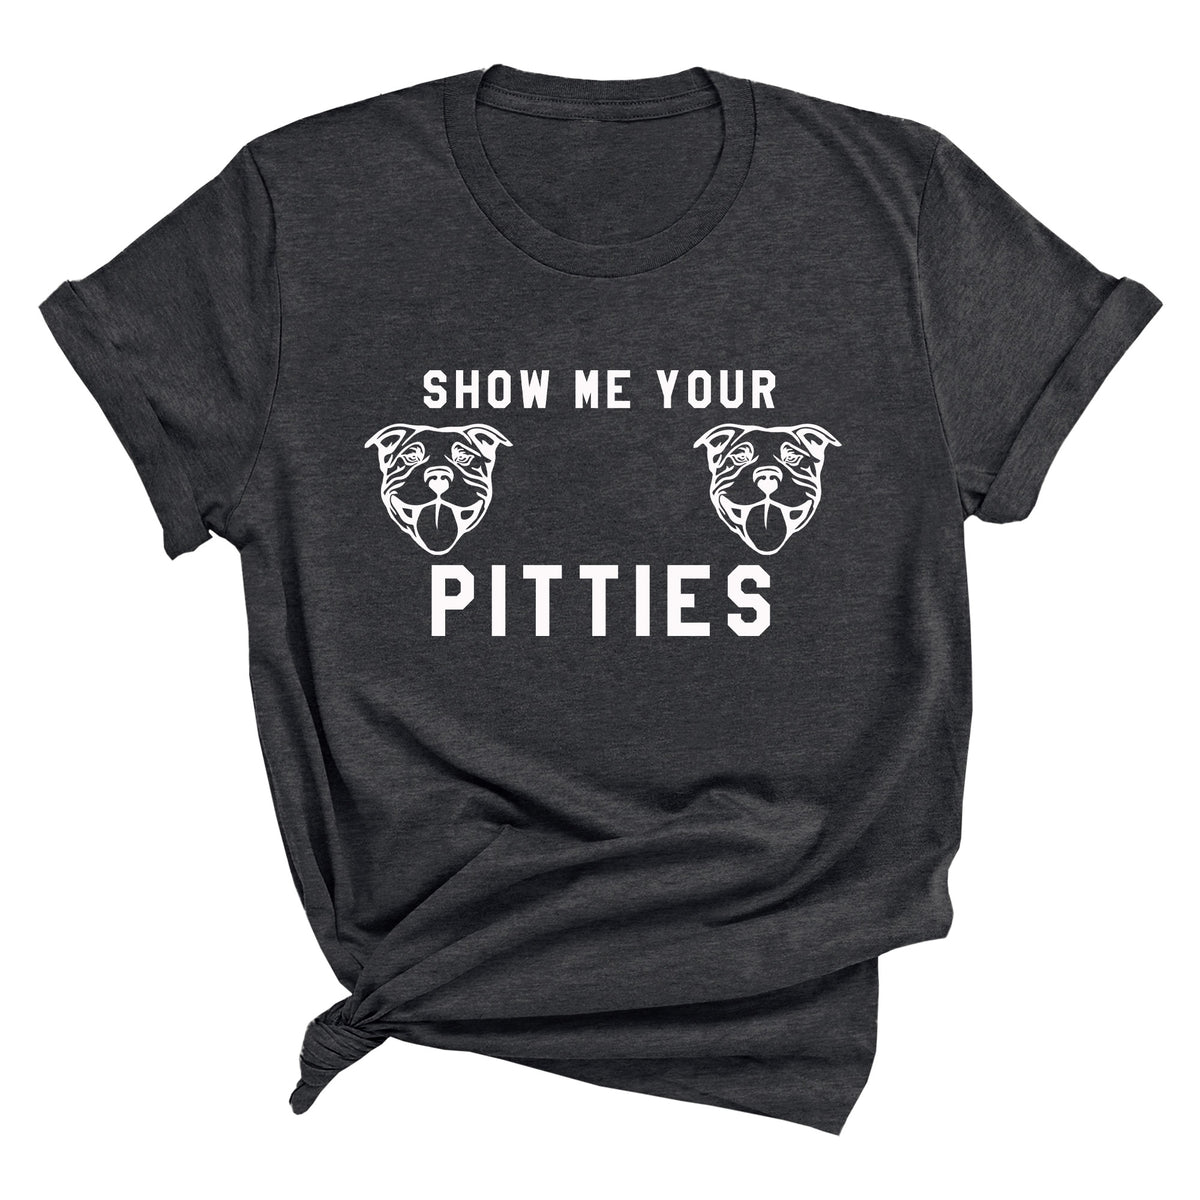 Show Me Your Pitties Unisex T-Shirt